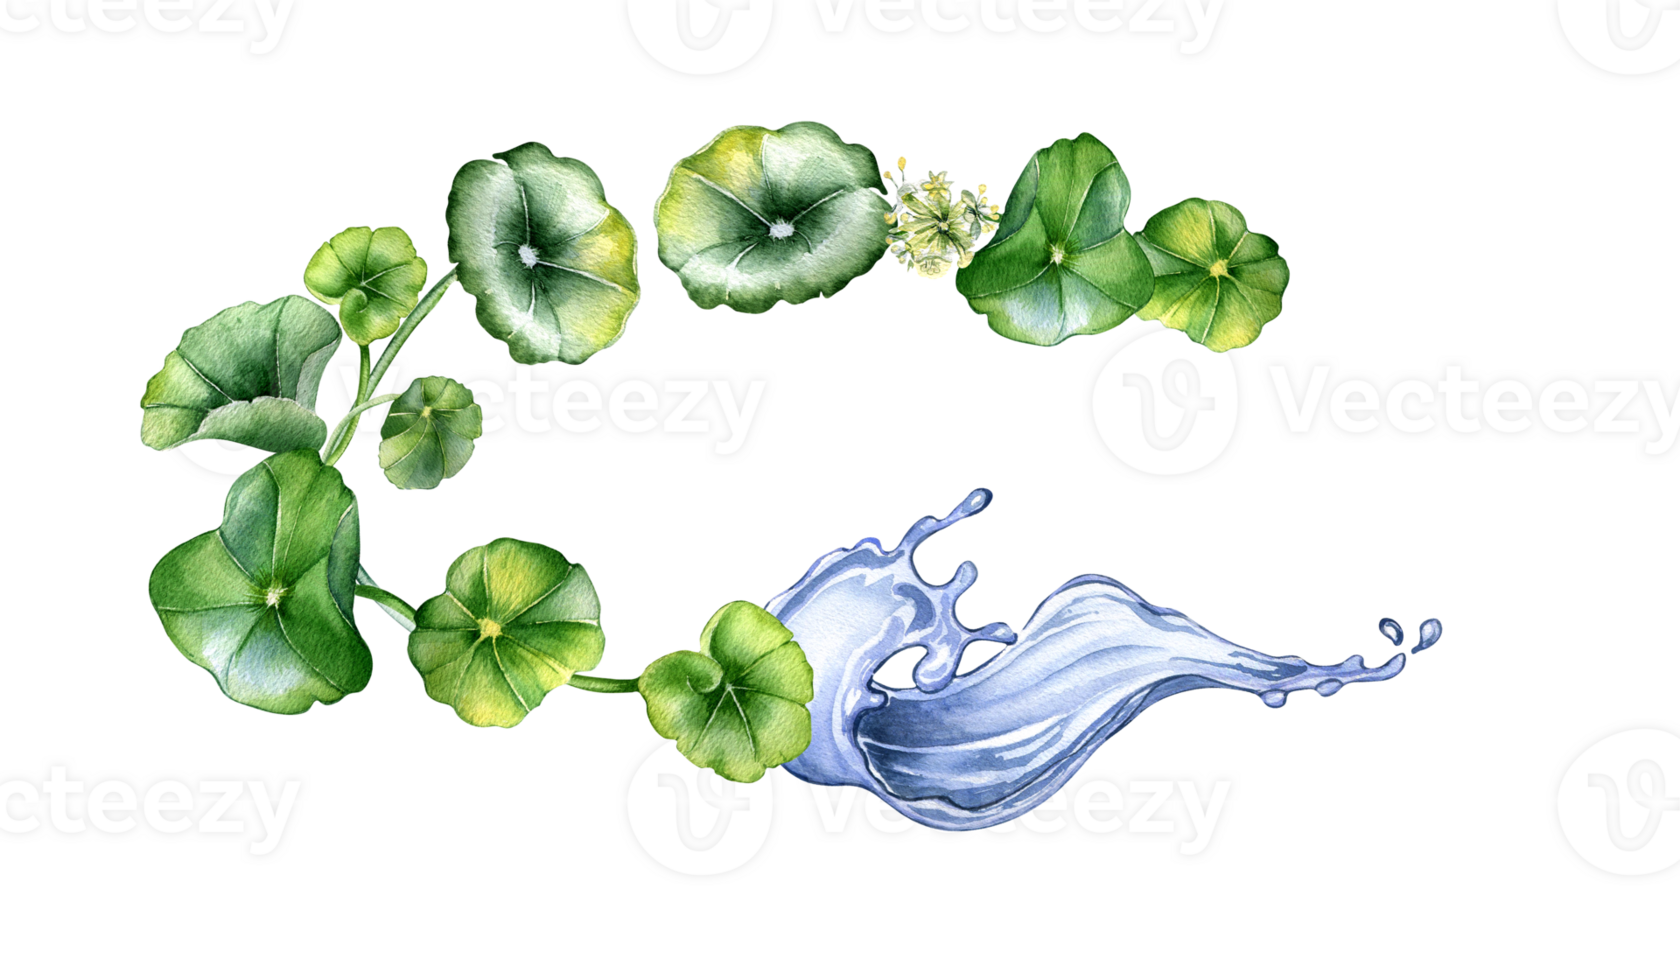 Wreath of centella asiatica, herbal plants watercolor illustration. Pennywort, gotu kola, rounded leaves, water splash hand drawn. Design for package, label, herbal plant collection. png